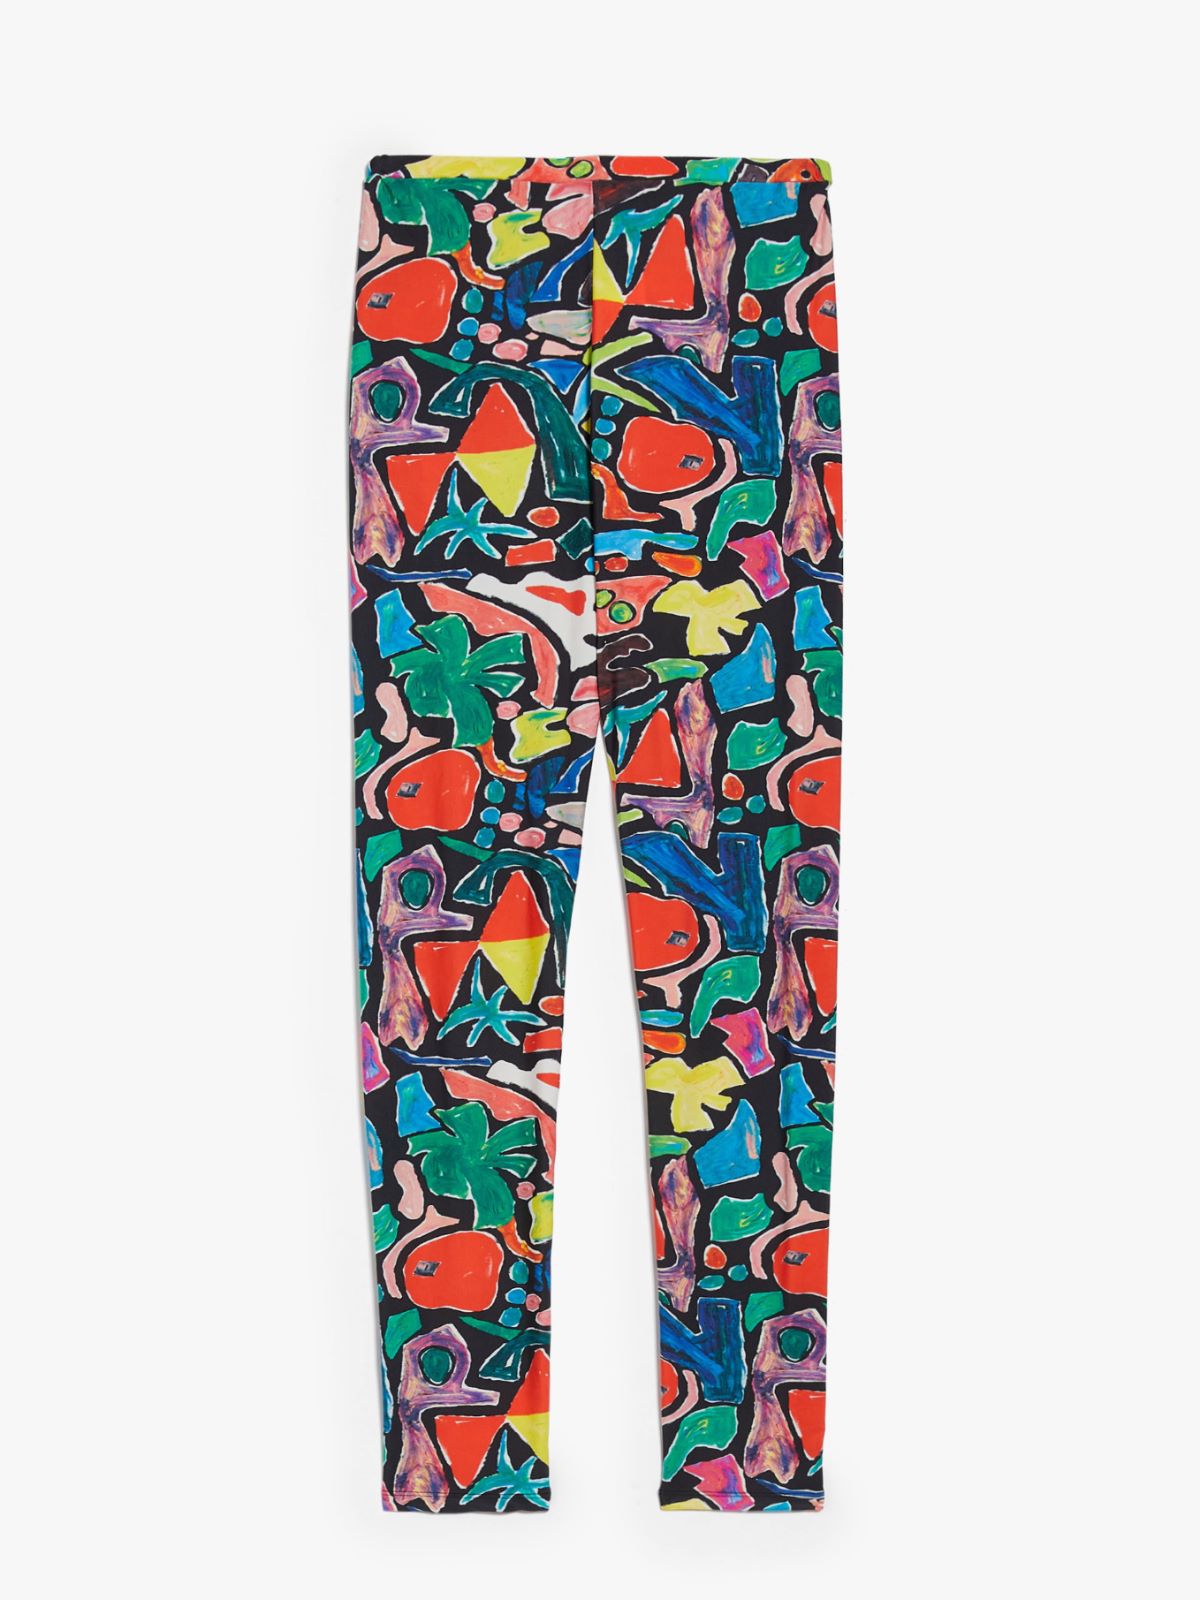 I thought it would be fun to order some mystery LuLaRoe leggings from  eBay... boy am I glad they were $3 : r/LuLaNo